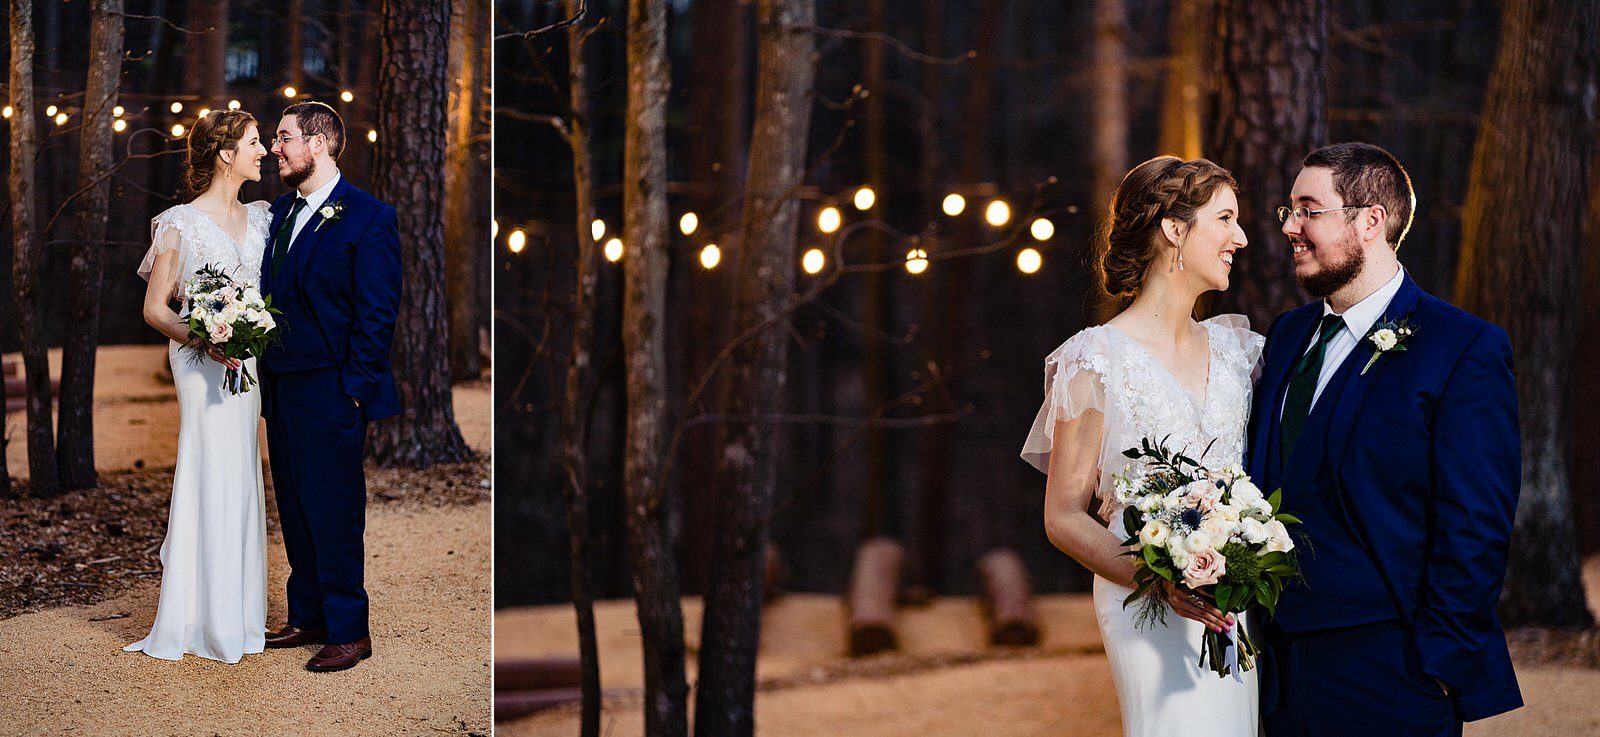 Bride and groom pose for portraits at twilight in the woods at The Meadows Raleigh